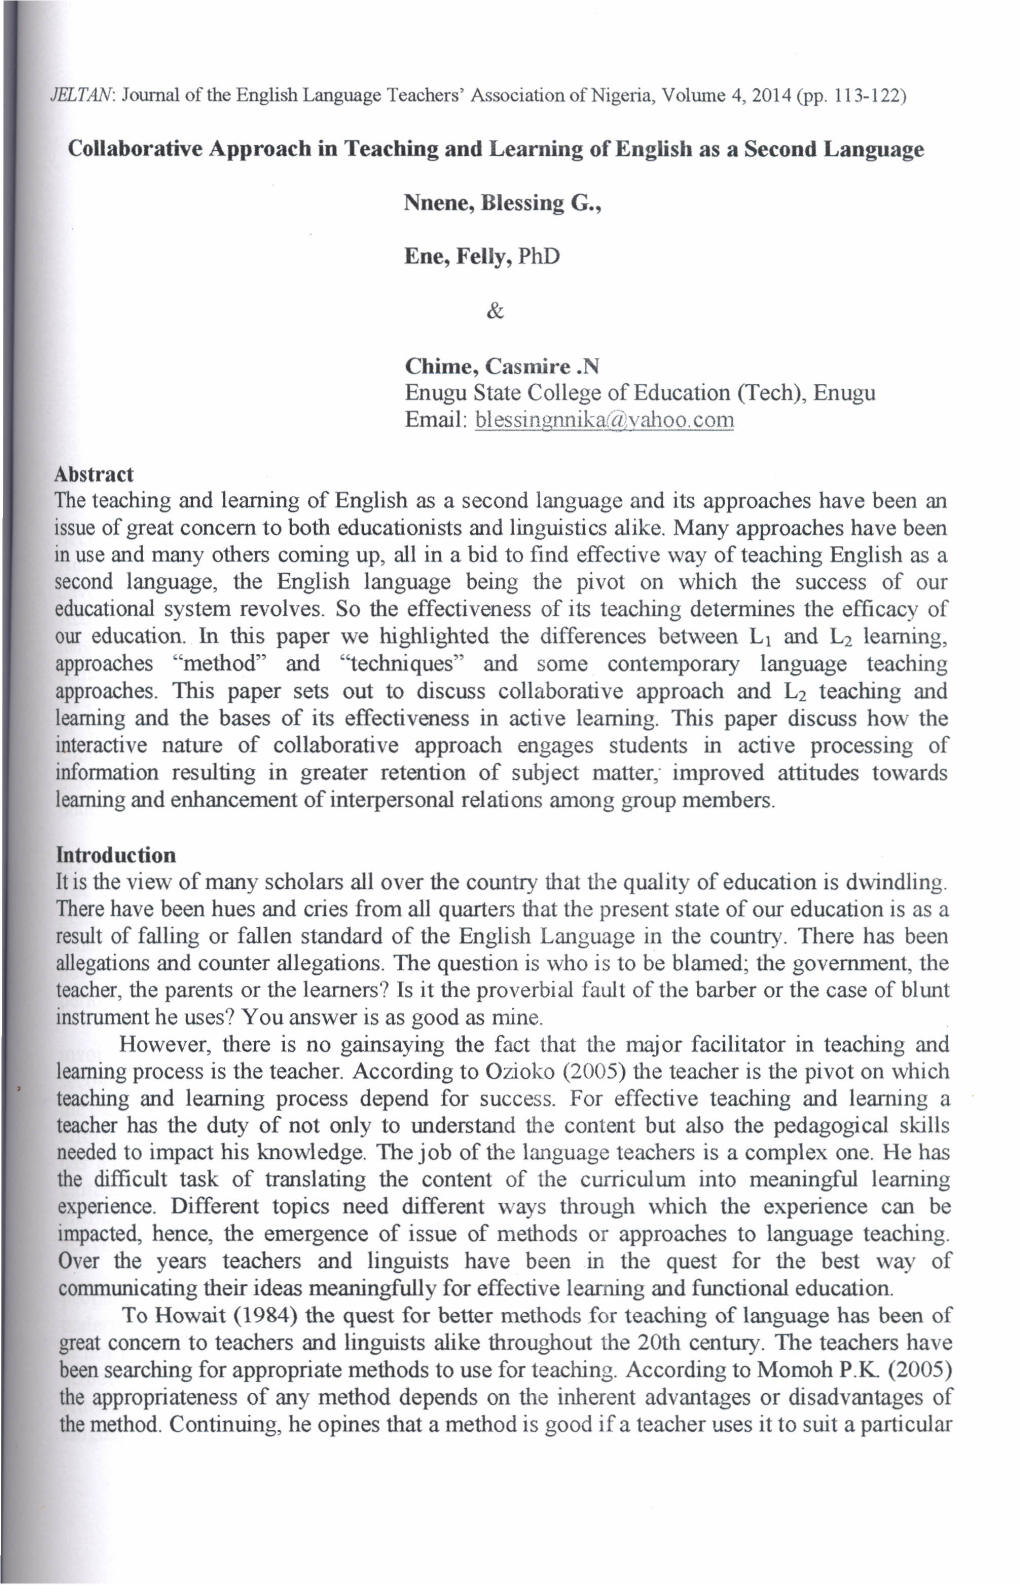 Collaborative Approach in Teaching and Learning of English As a Second Language